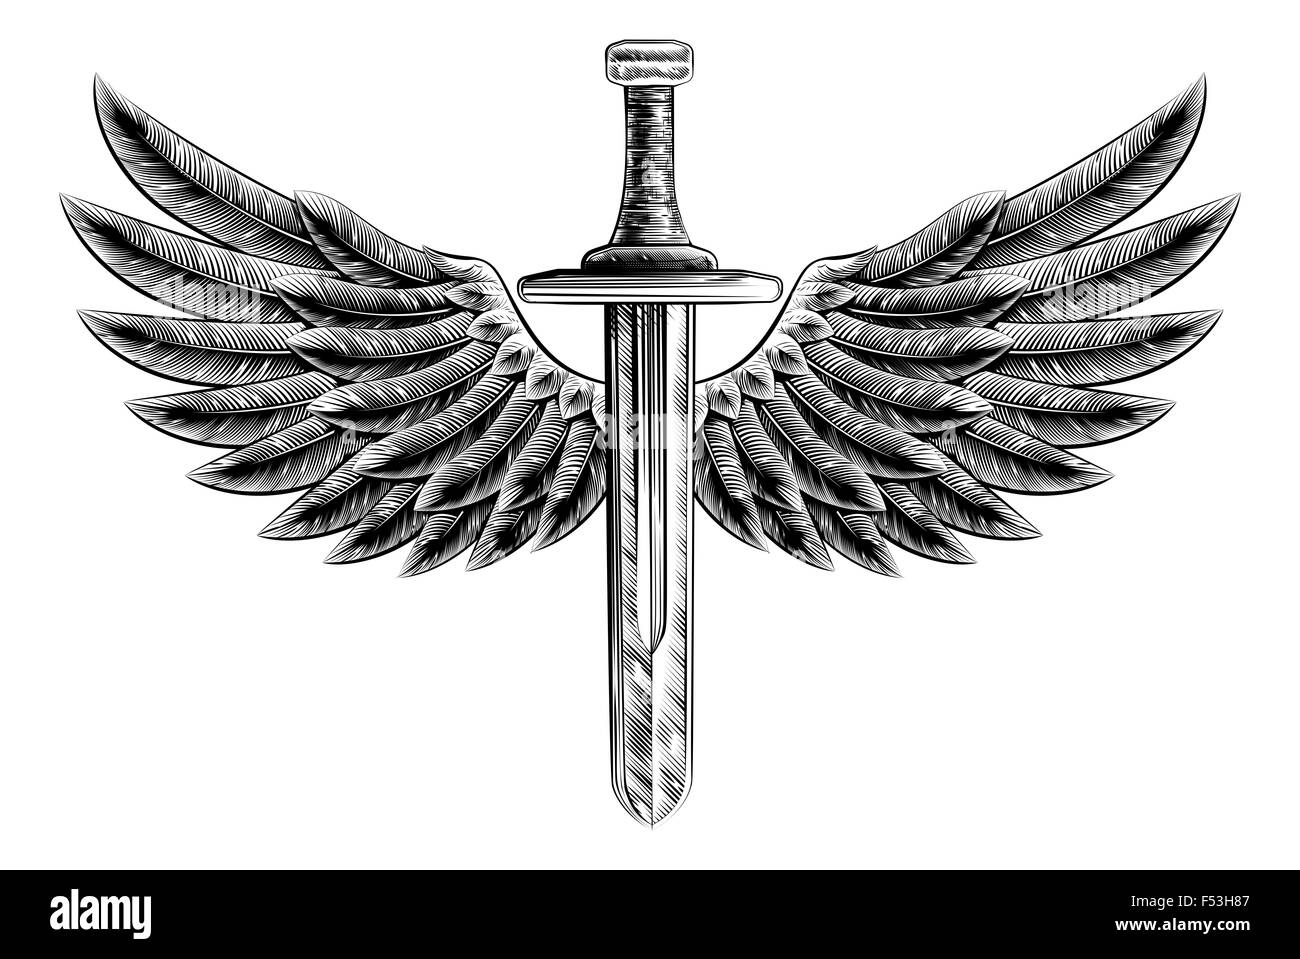 Original illustration of vintage woodcut style sword with eagle bird or angel wings Stock Photo